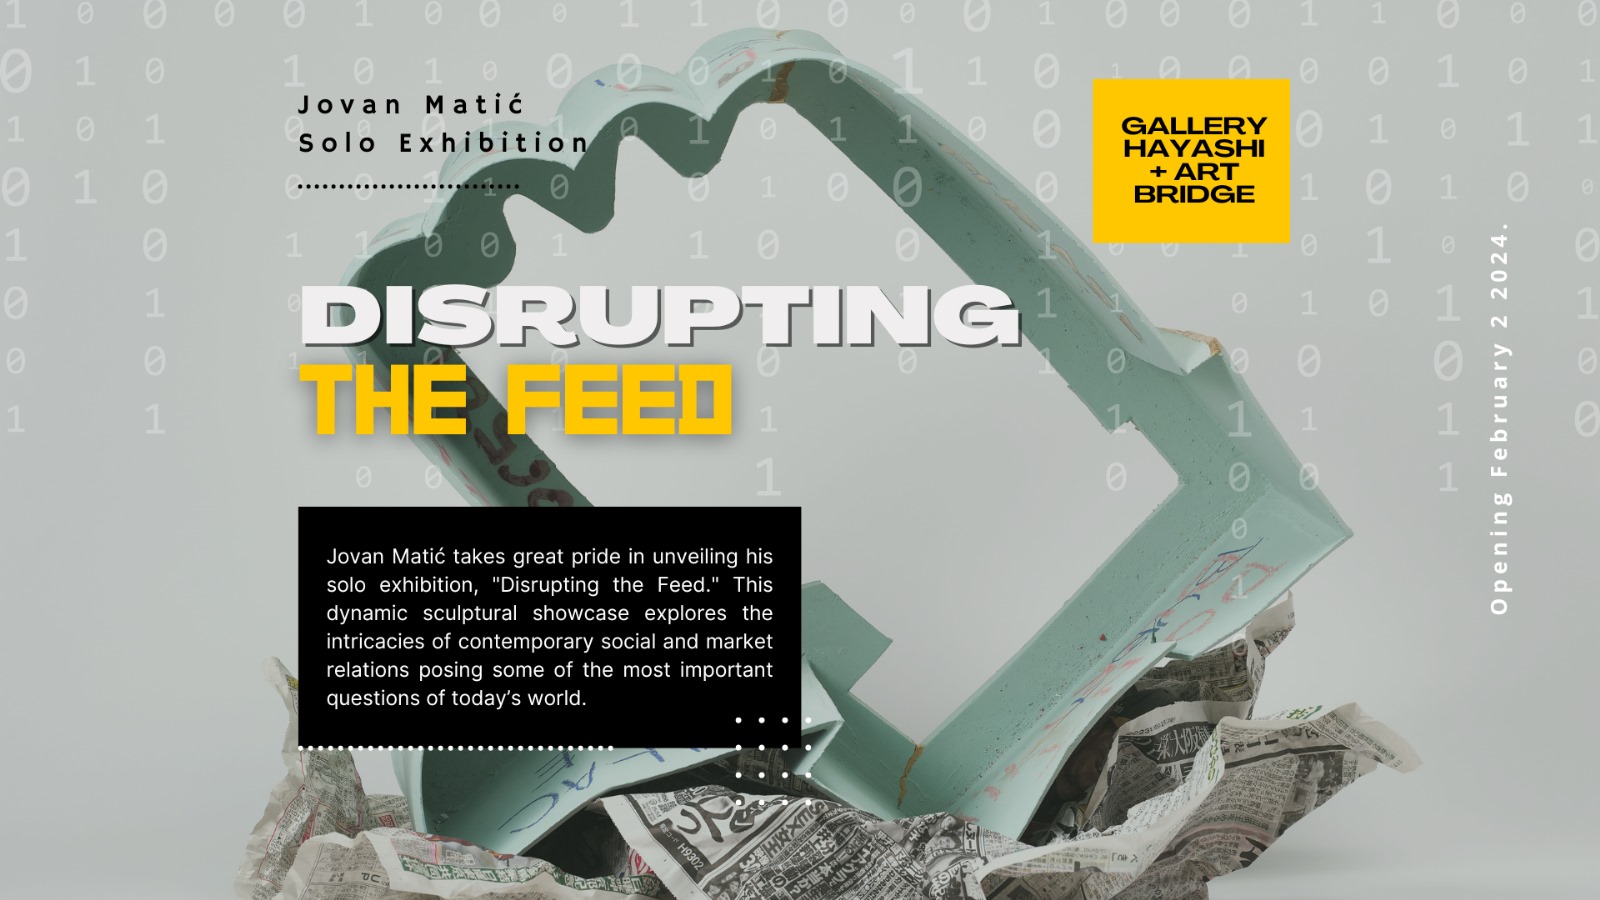 Disrupting The Feed